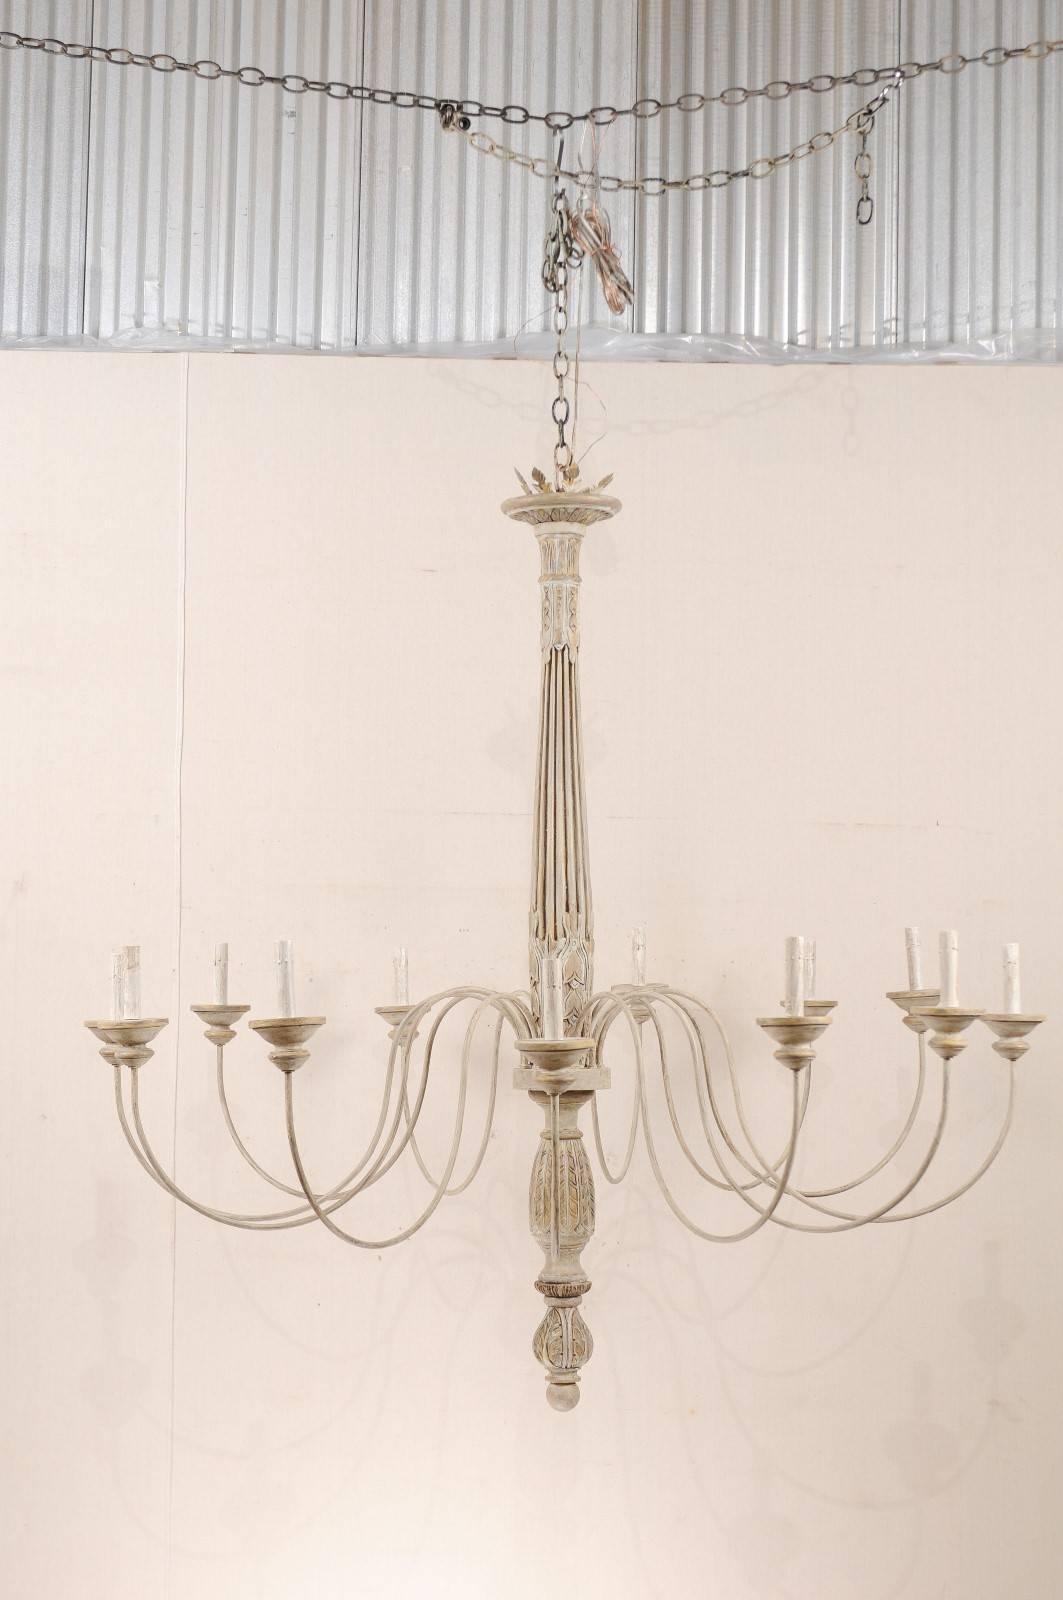 A large sized custom twelve-light painted wood and metal chandelier. This exquisite mid-20th century chandelier has been custom-made from old Italian fragments. This chandelier features a fluted and carved wood column with fluid s-shaped swooping